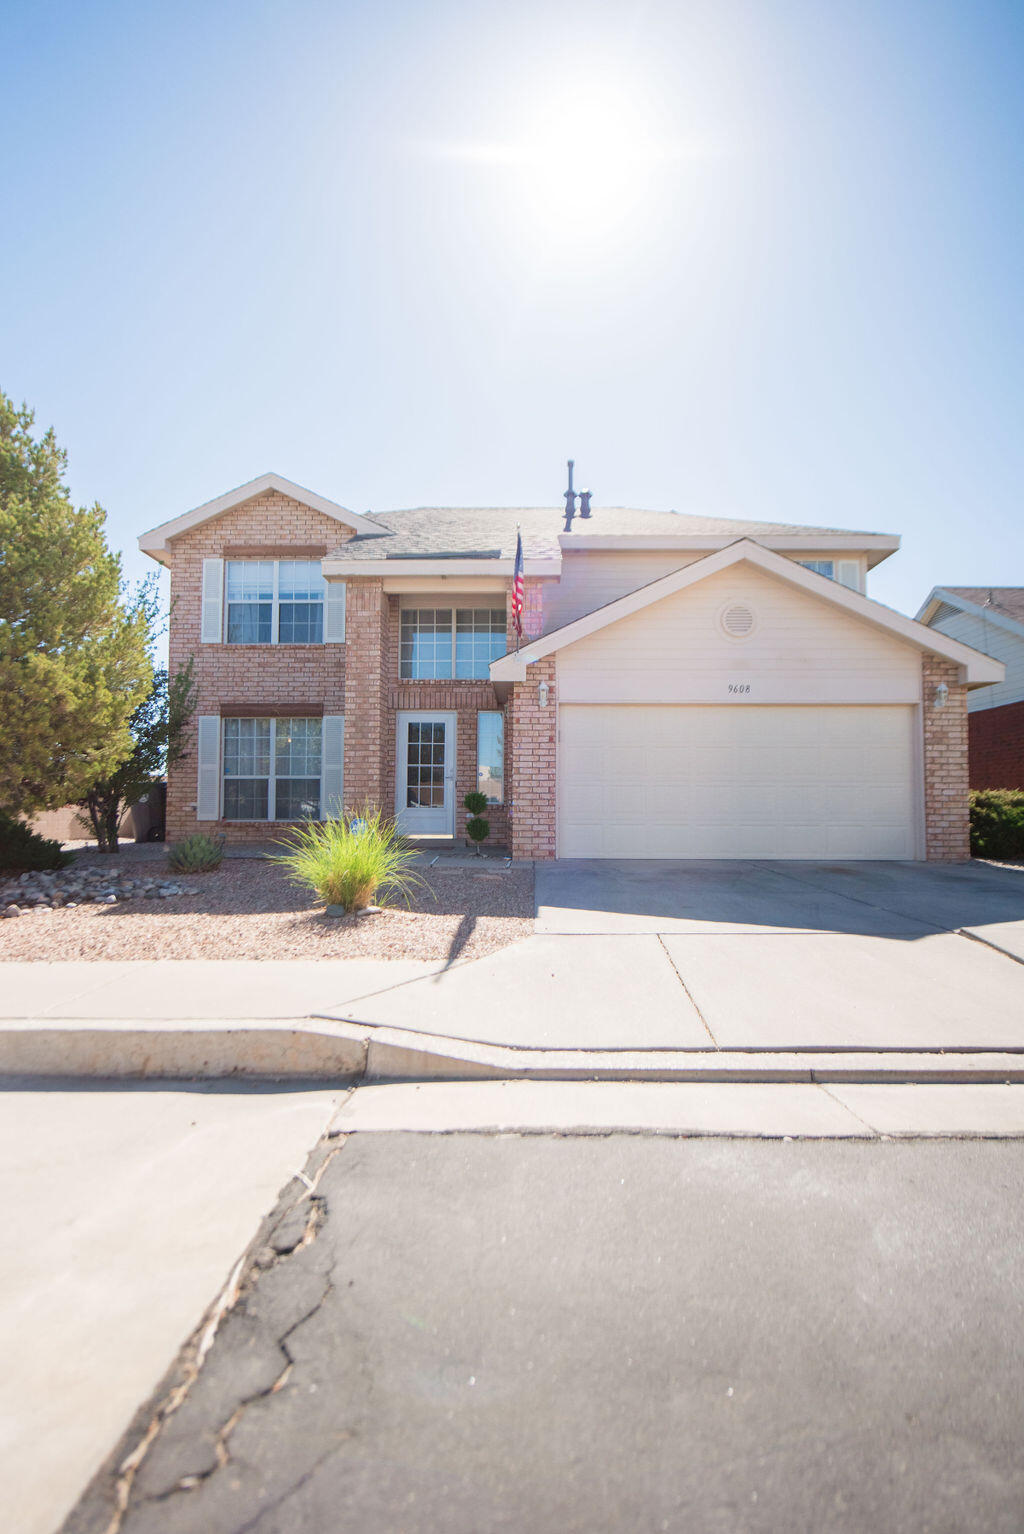 This Sivage Thomas home sits on a corner lot, in a cul de sac! Large back yard with access, two living spaces, covered patio and a balcony with views of the Sandia Mountains!